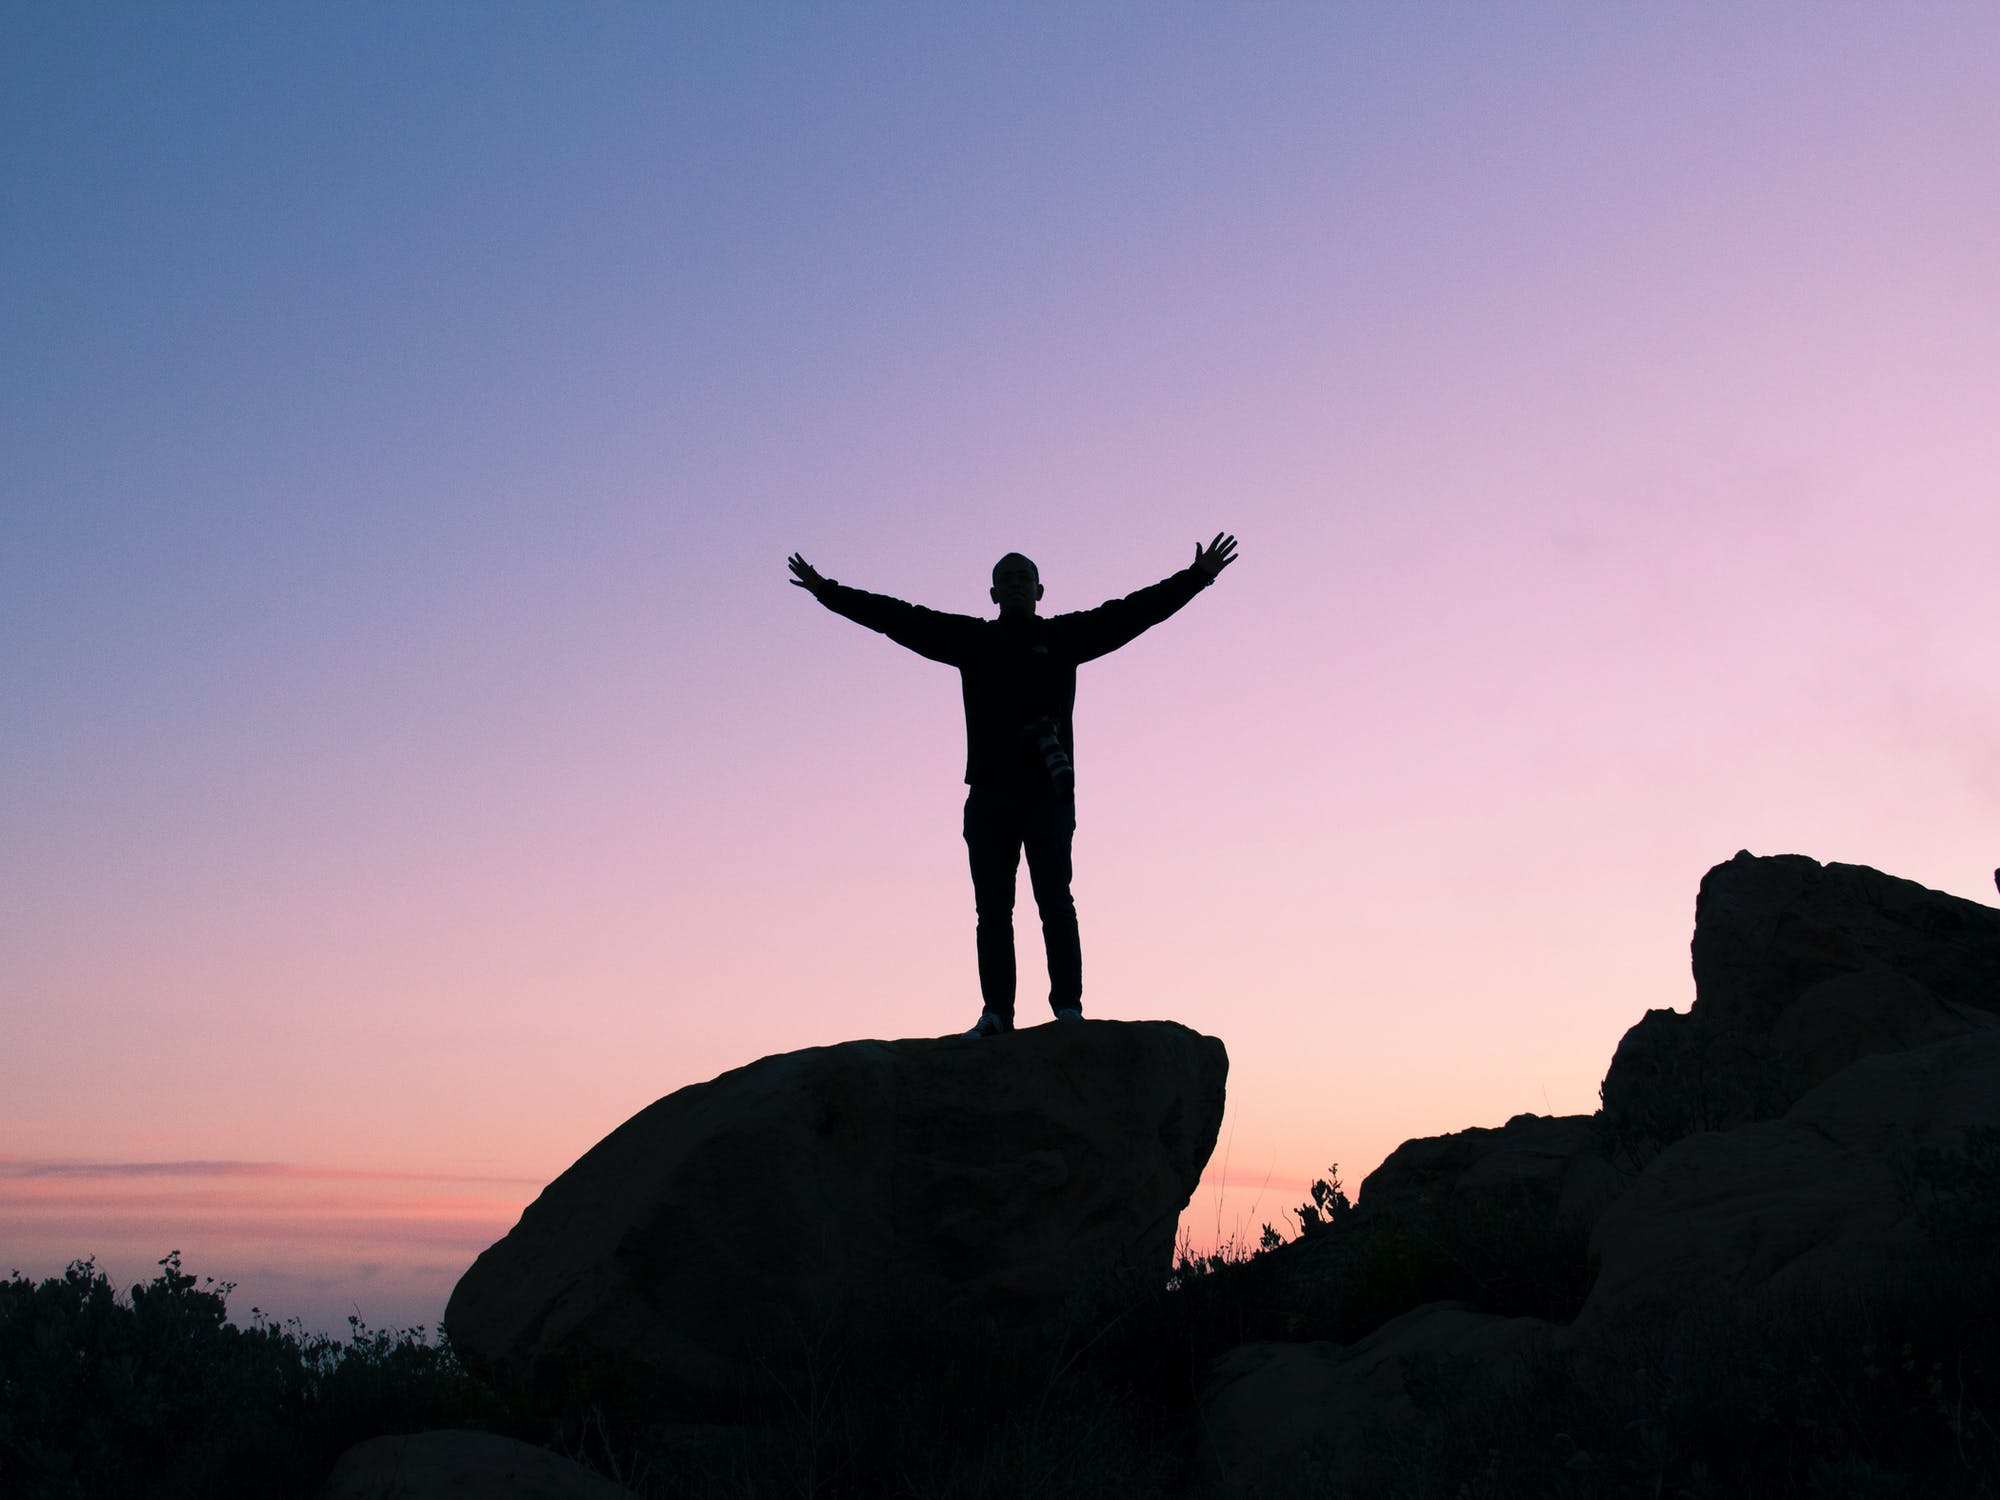 A silhouette of a person standing on a rock with their arms outstretched.